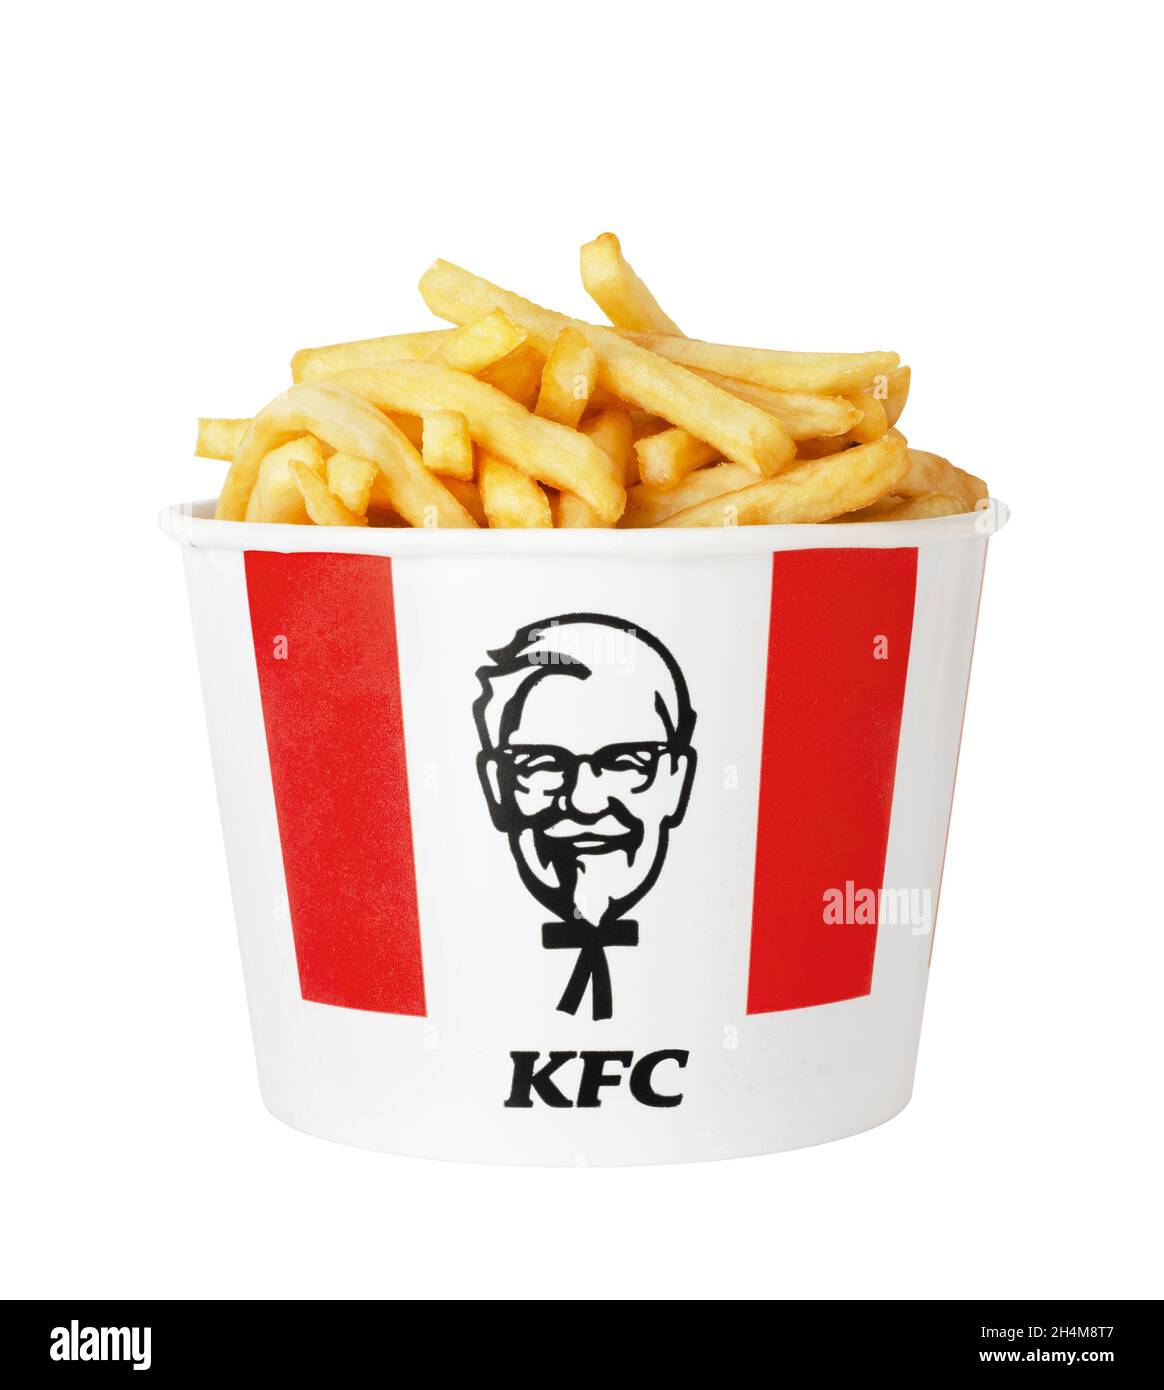 Moscow, Russia - July 16, 2020: A lots of KFC french fries in bucket of KFC (Kentucky Fried Chicken) fast food. Isolated on a white background. Stock Photo